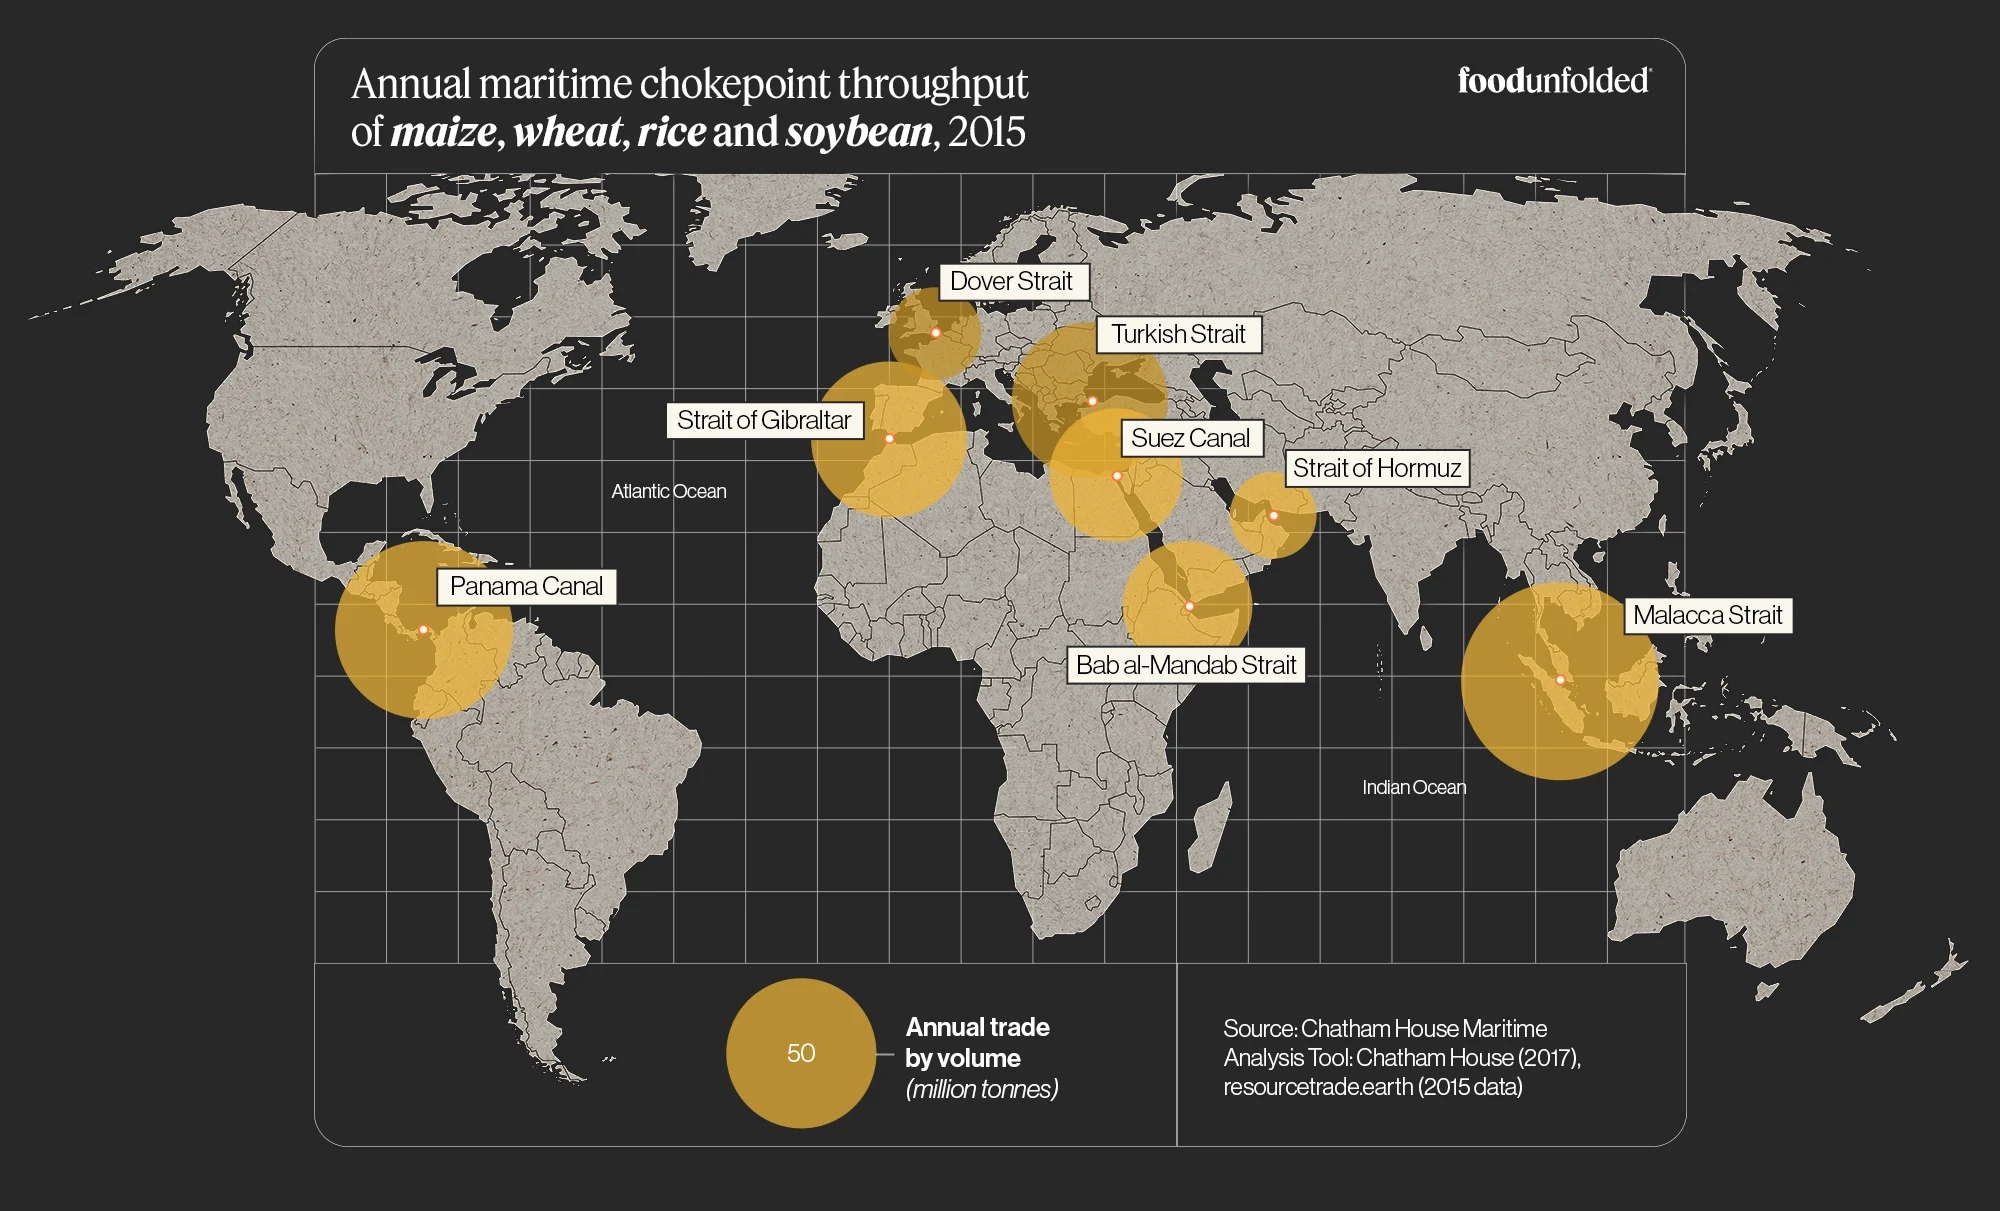 A 2017 Chatham House report mapped out eight maritime chokepoints in global food trade. These are locations considered to be systemically important to international trade in food and other agricultural products